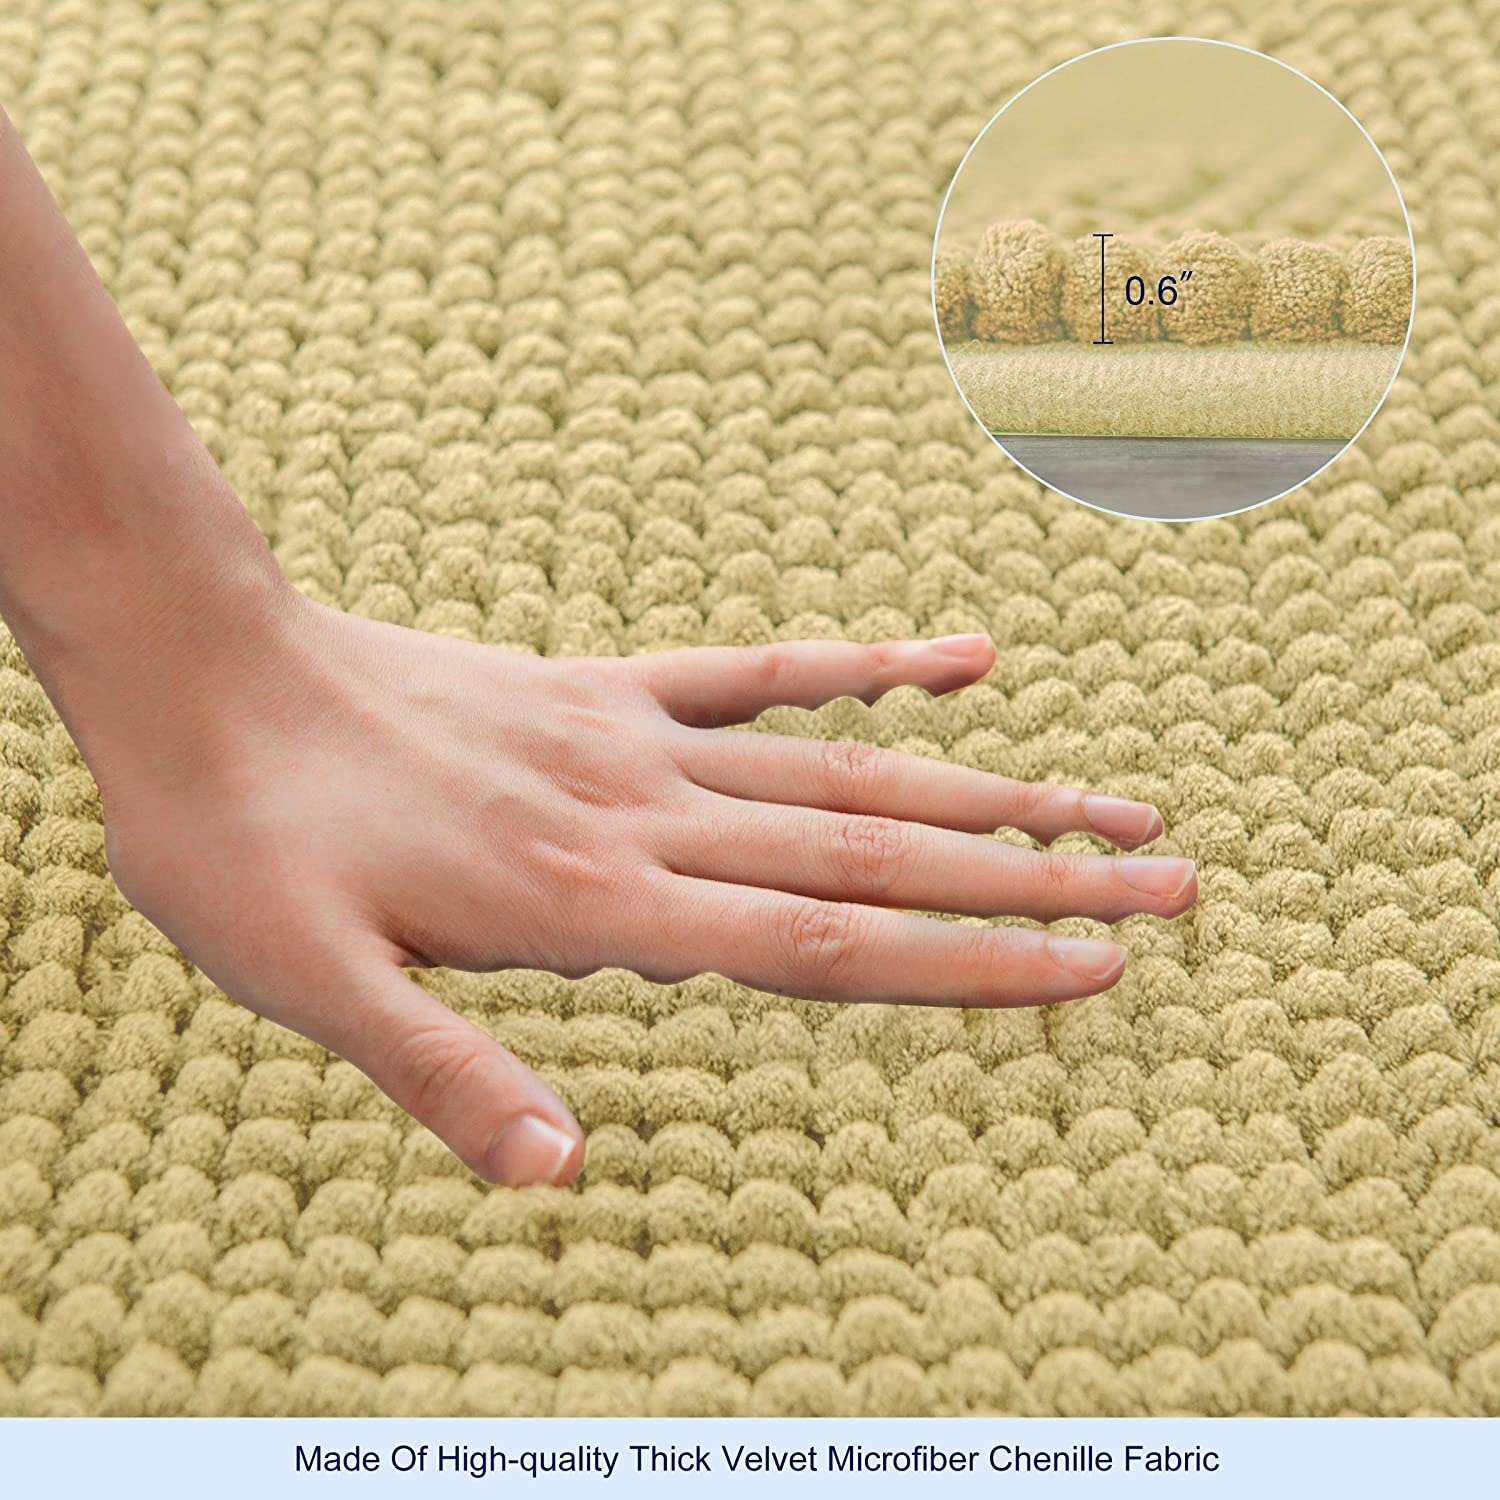 Details about   MIULEE Luxury Shaggy Chenille Bathroom Rugs Non Slip Soft Bath Mats Extra Absorb 